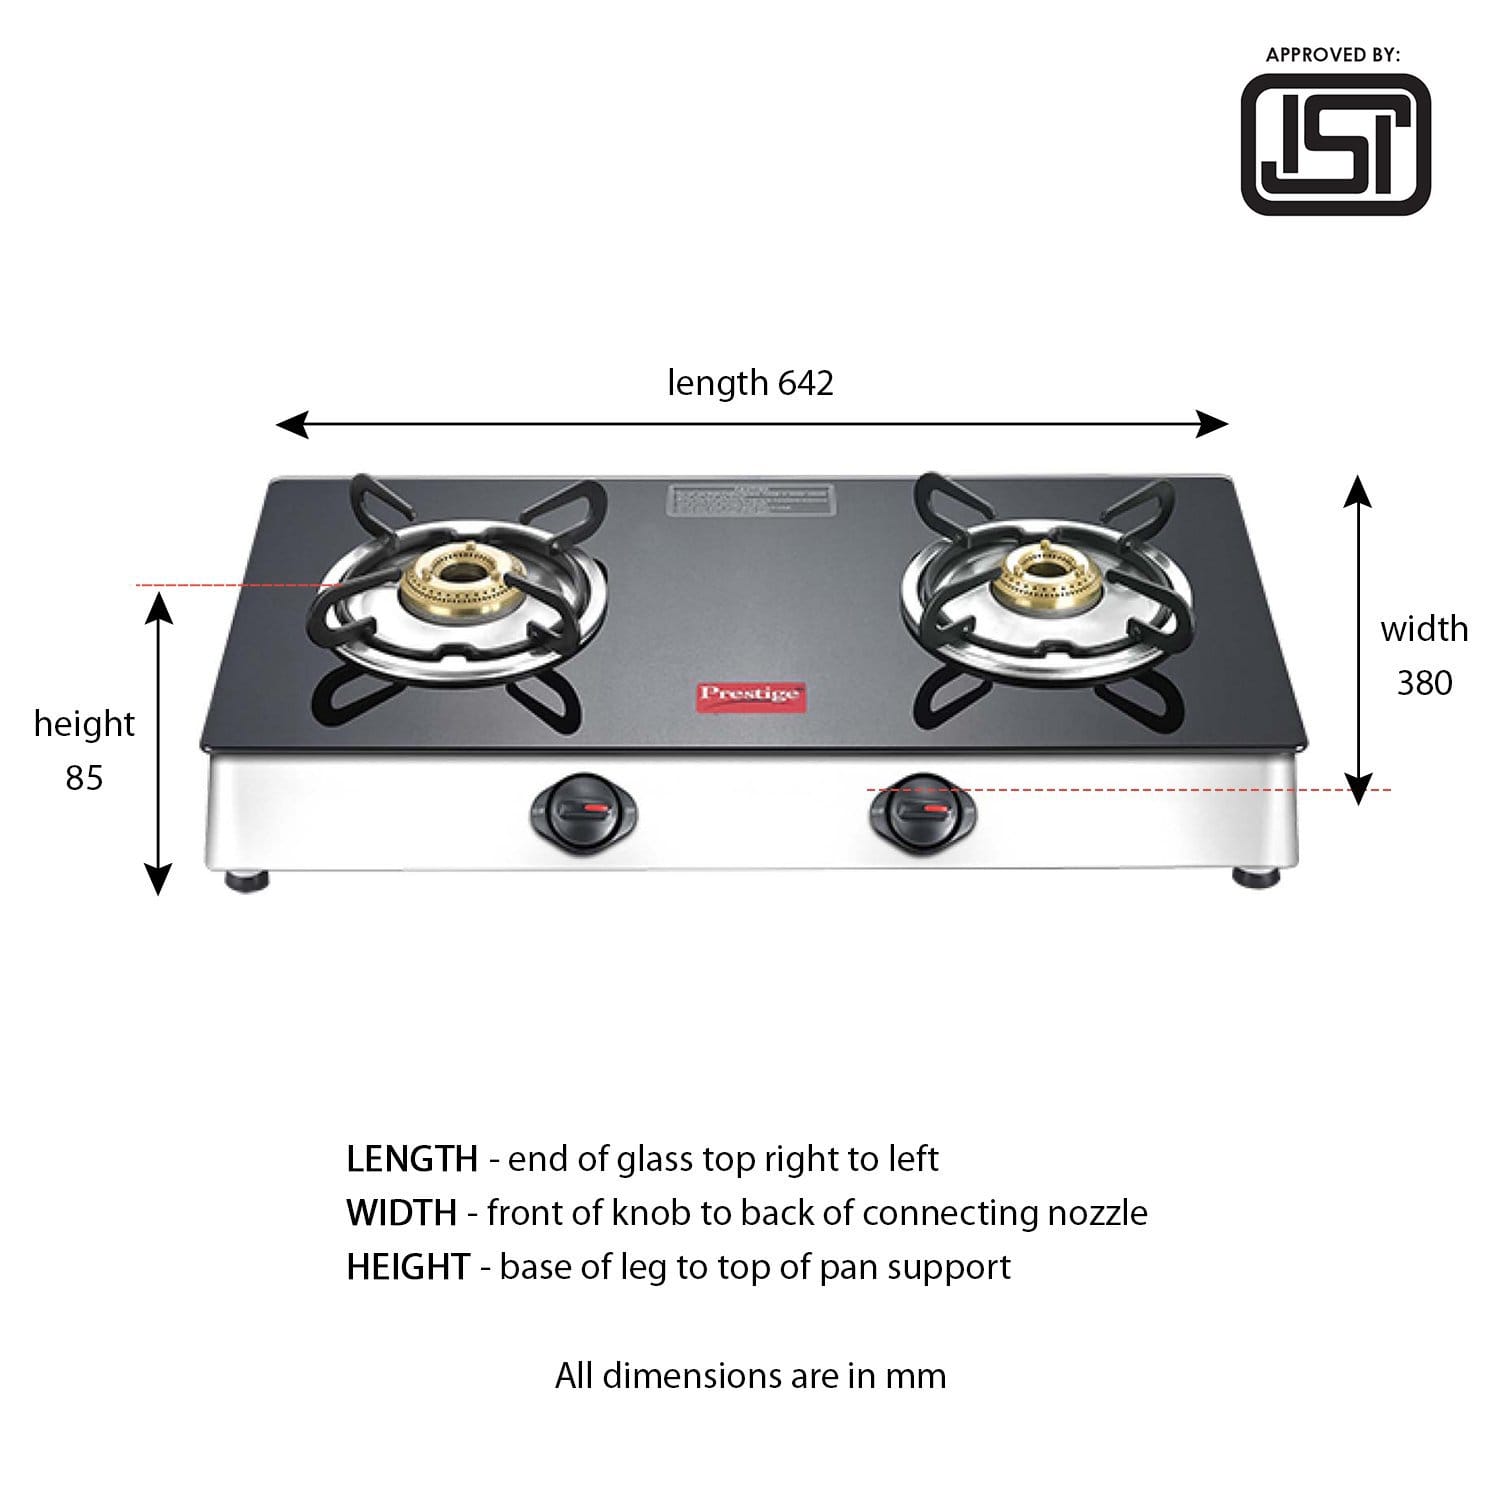 Prestige Marvel Plus Stainless Steel 2 Burner Gas Stove (GTM 02 SS) (ISI Certified) - KITCHEN MART